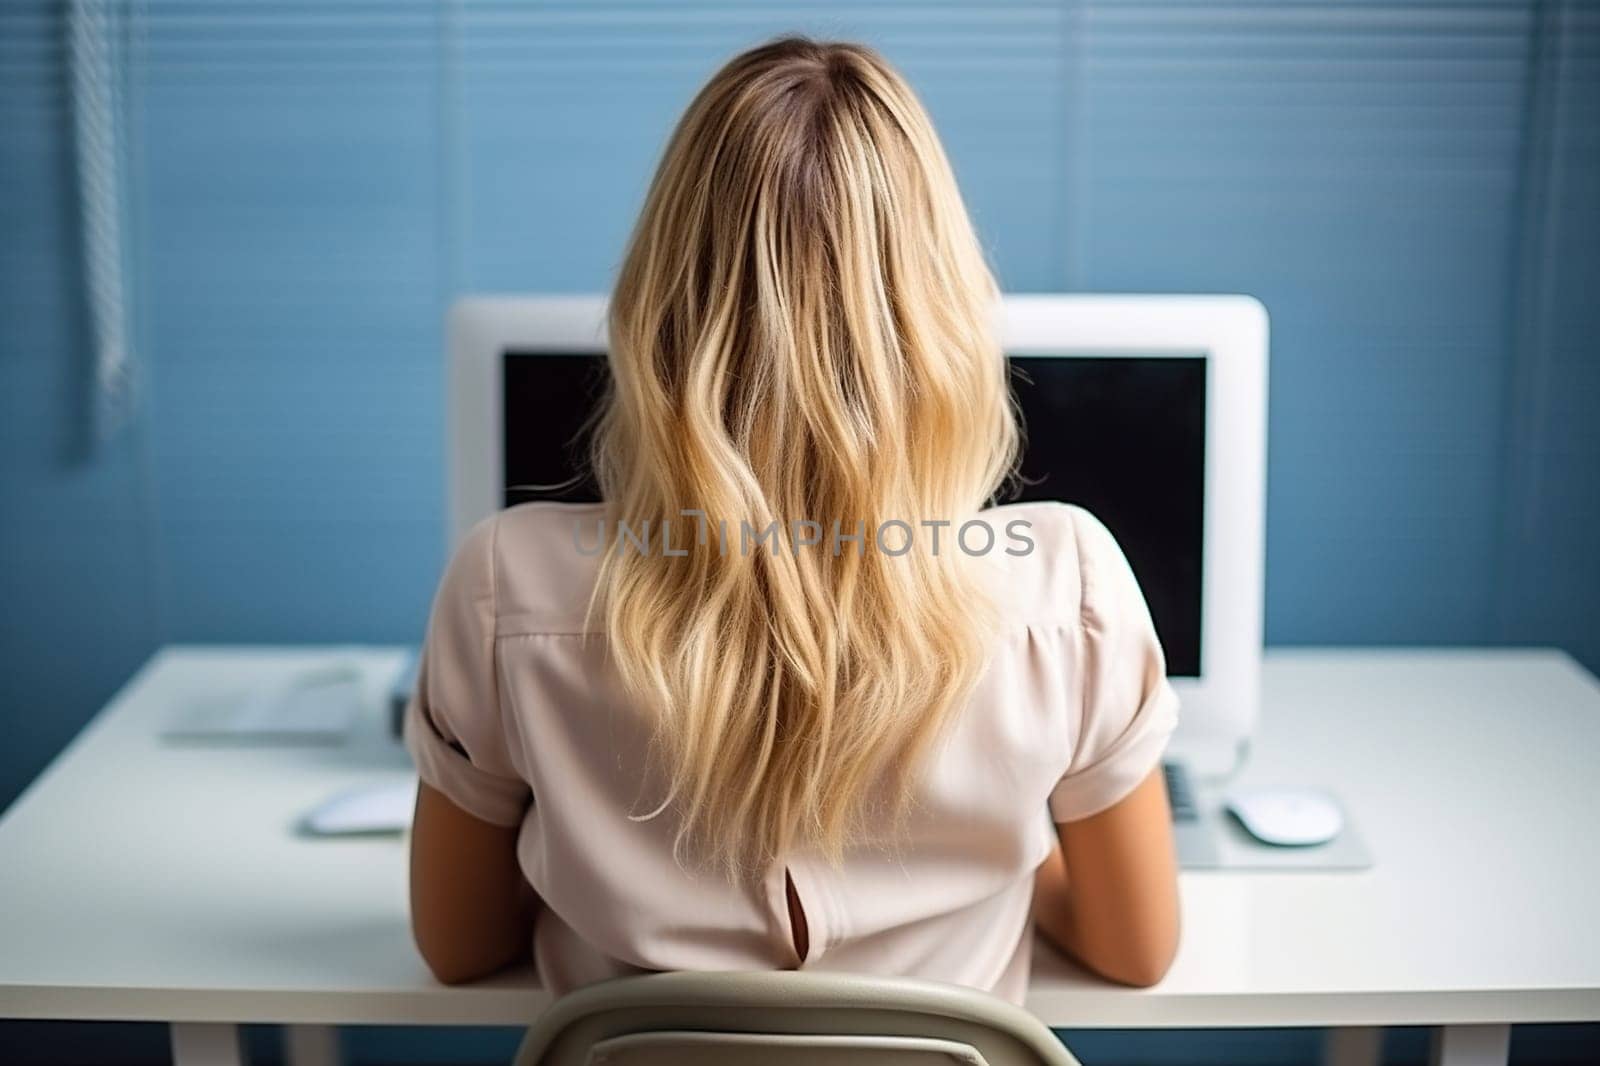 Business woman in light clothes typing on a laptop at the workplace. Woman working on a keyboard in the office.